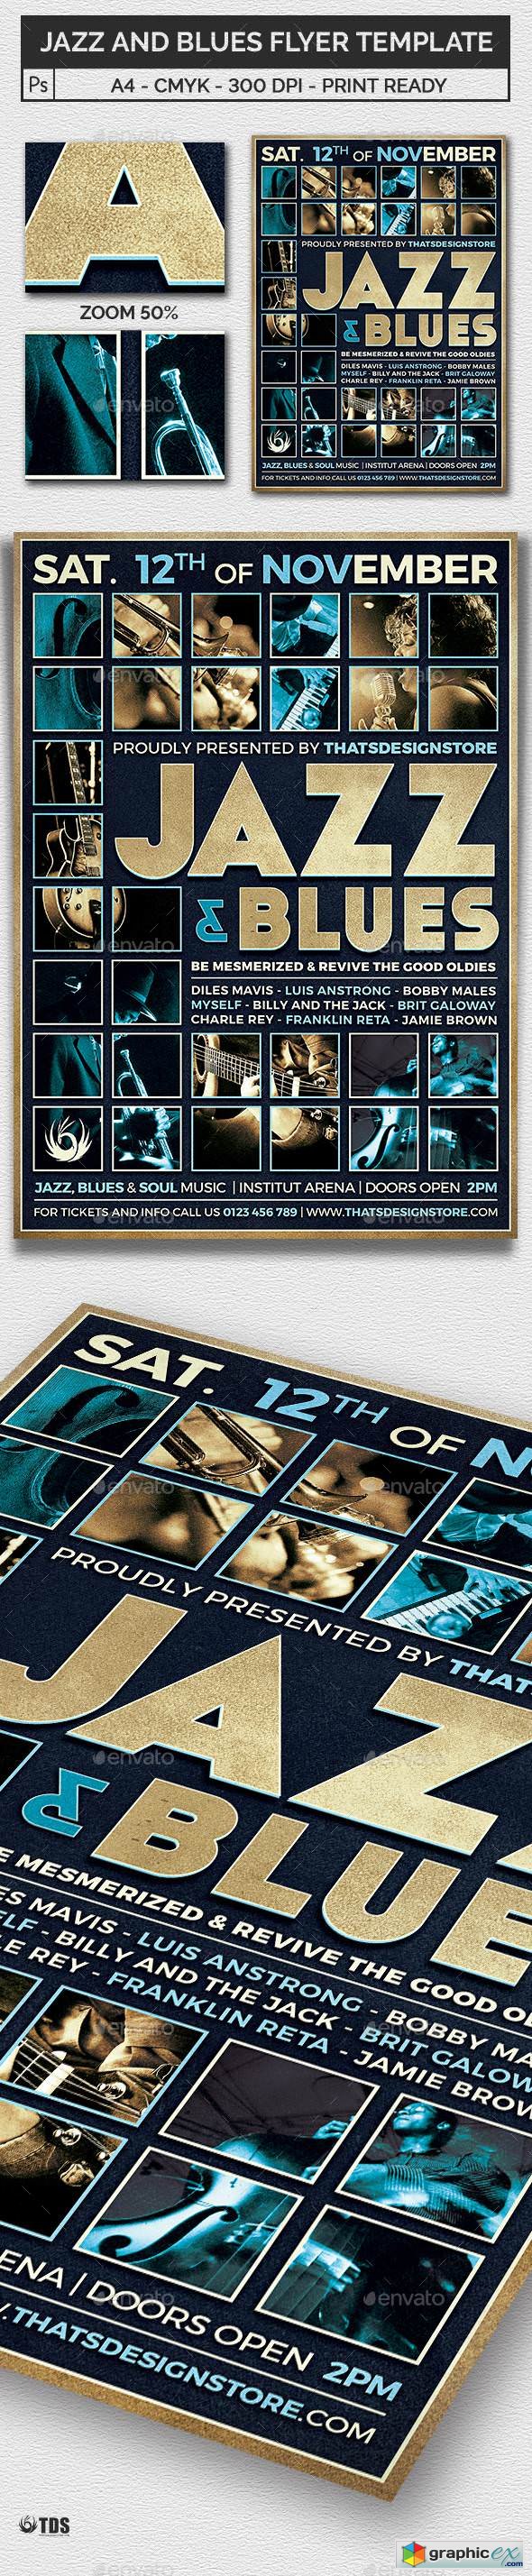 Jazz and Blues Flyer Template 17182205